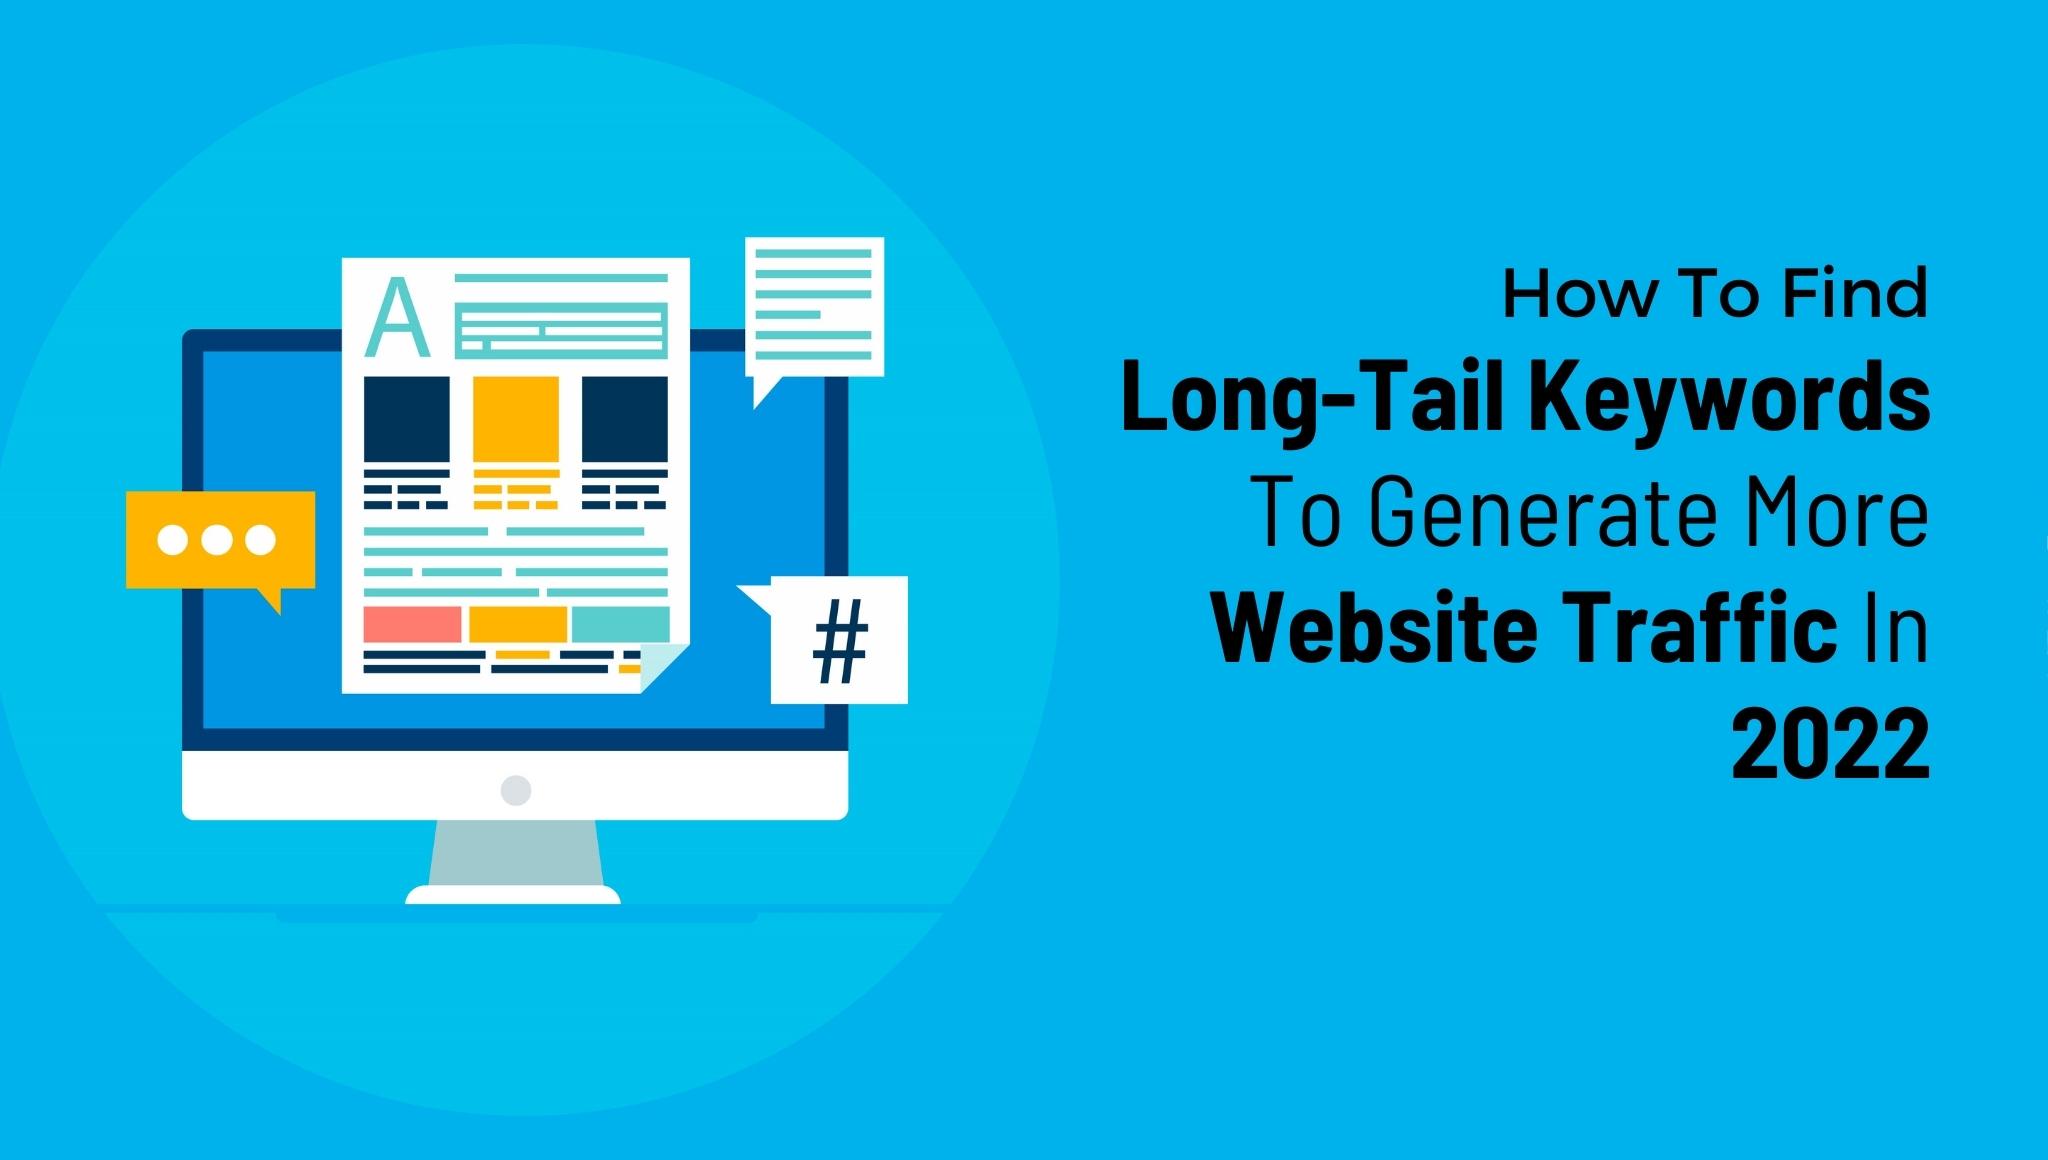 How To Find Long Tail Keywords To Generate More Website Traffic in 2022